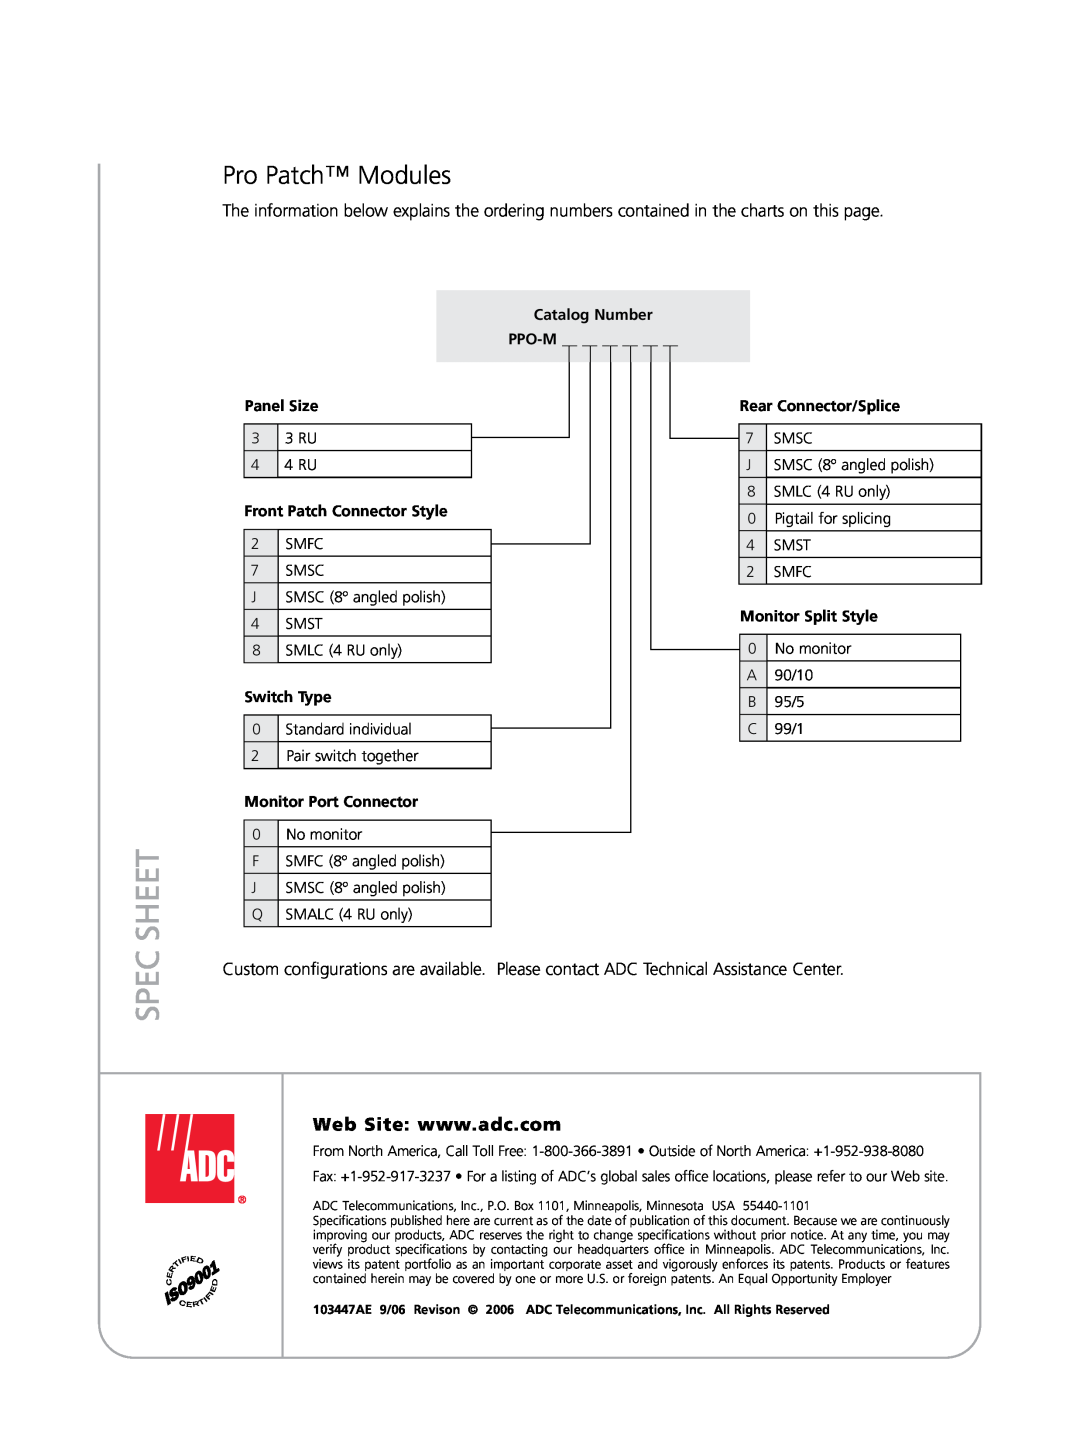 ADC specifications Pro Patch Modules, Sheet, Spec 